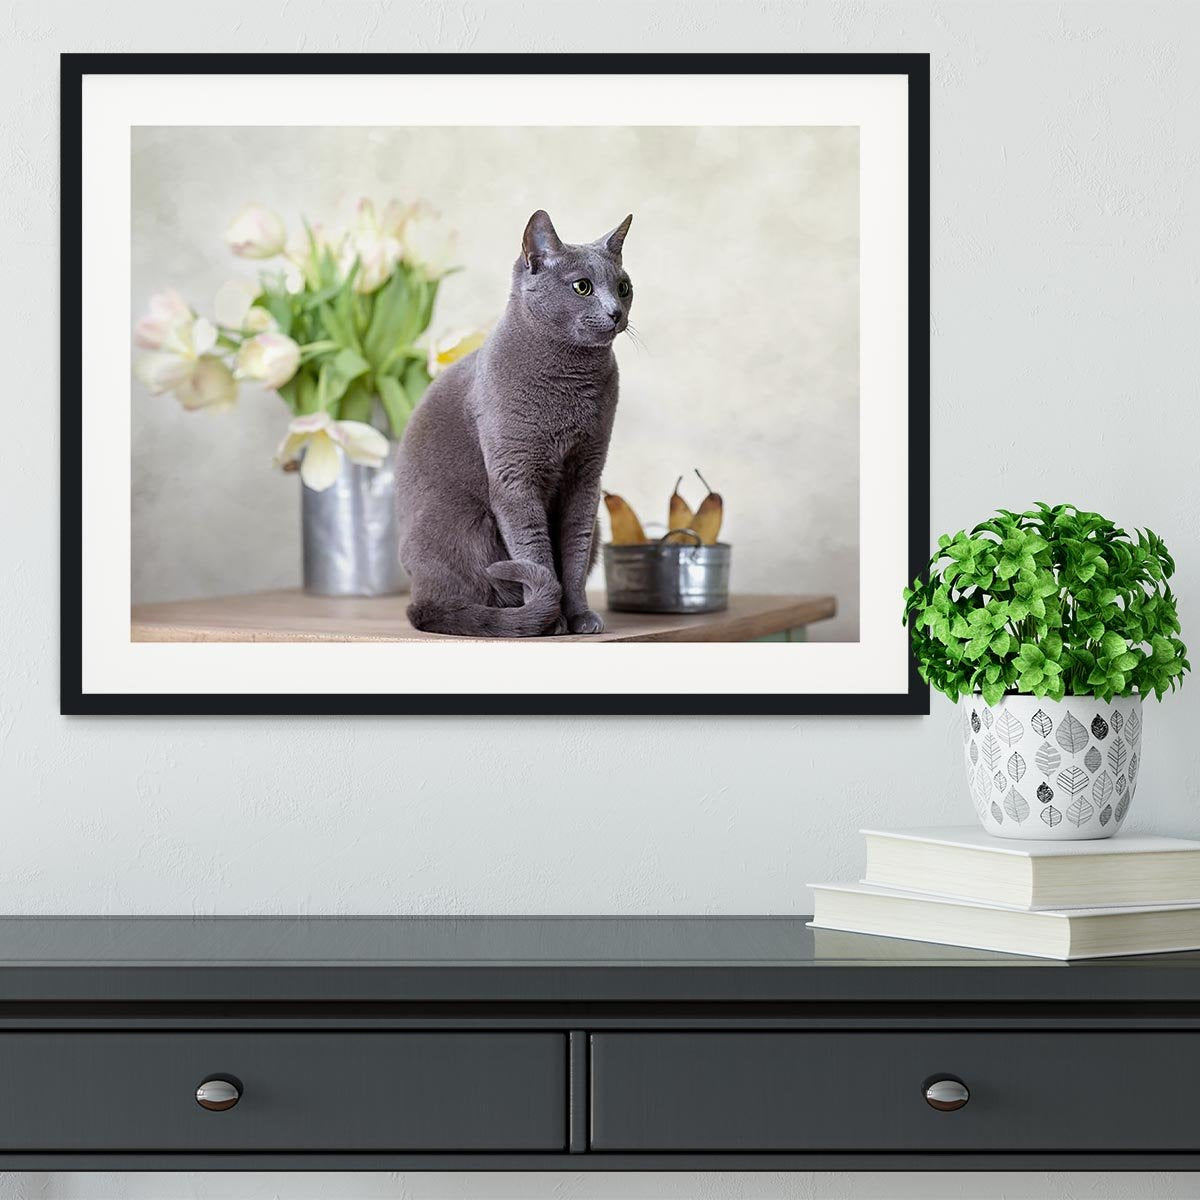 Russian Blue cat sitting on table with pears and tulips Framed Print - Canvas Art Rocks - 1